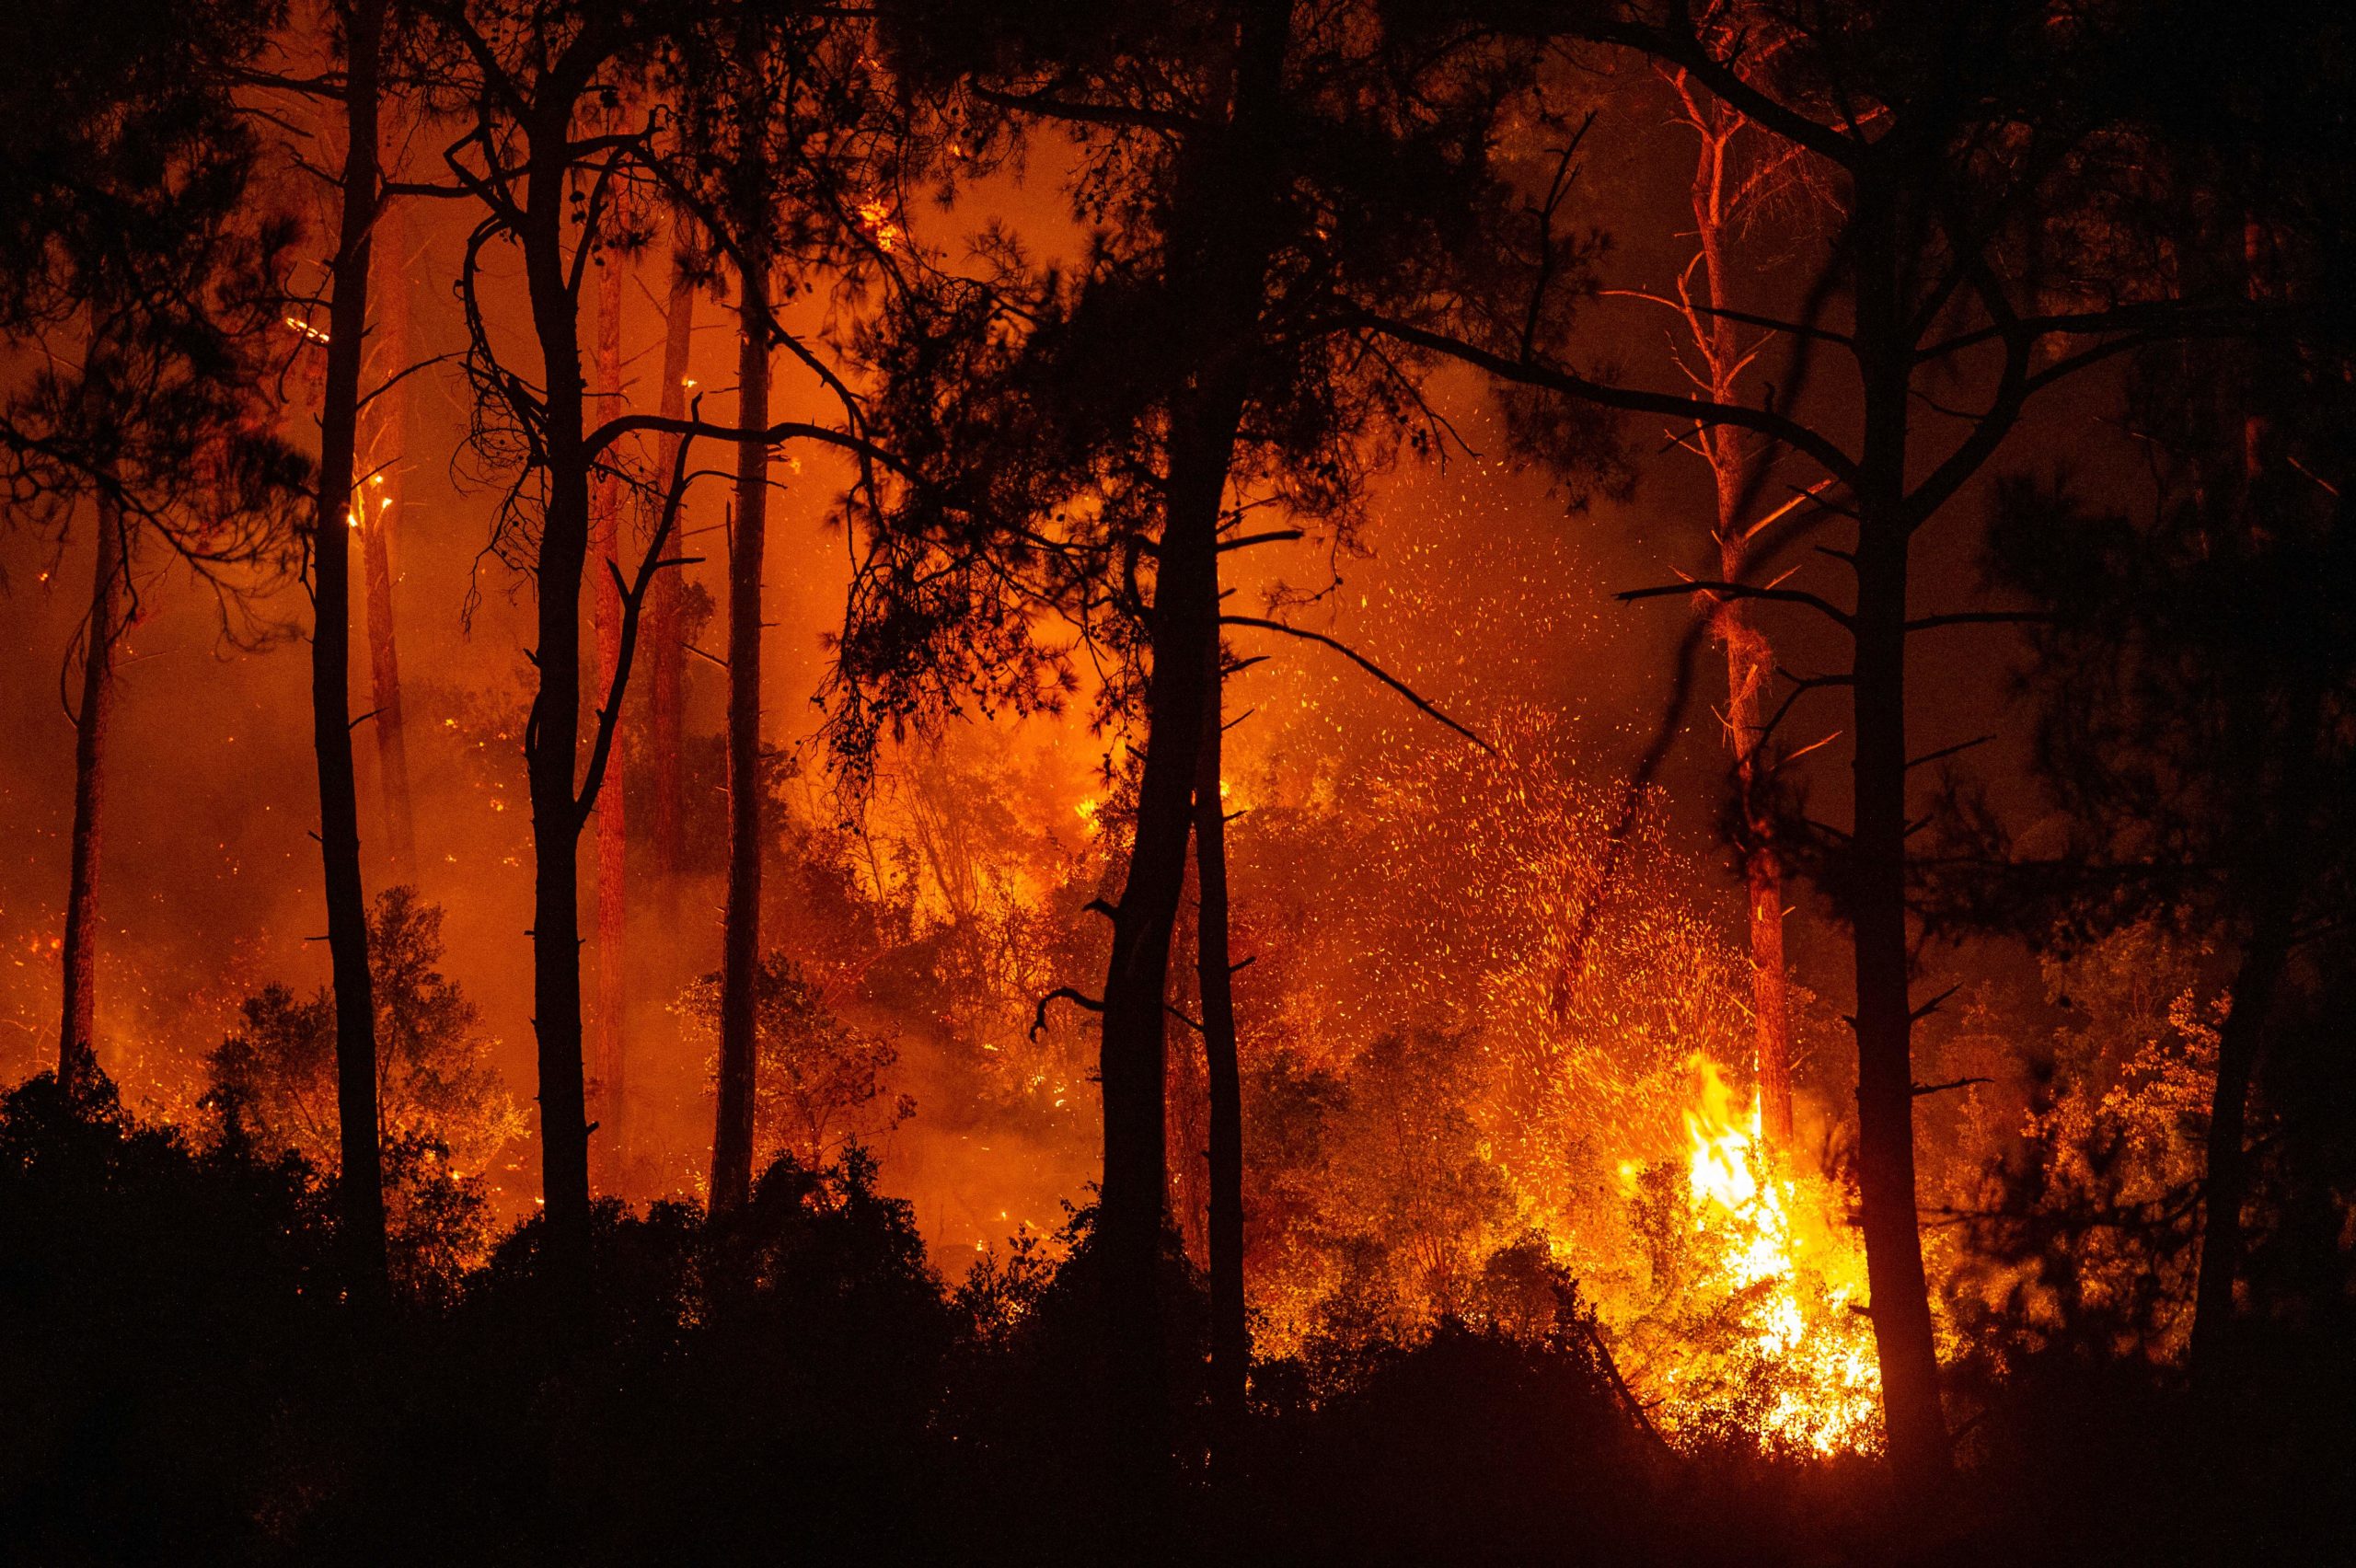 This photograph shows a forest burning as a massive wildfire engulfed a Mediterranean resort at the Marmaris district of Mugla, on August 1 2021. - At least three people were reported dead on July 29, 2021 and more than 100 injured as firefighters battled blazes engulfing a Mediterranean resort region on Turkey's southern coast. (Photo by YASIN AKGUL/AFP via Getty Images)